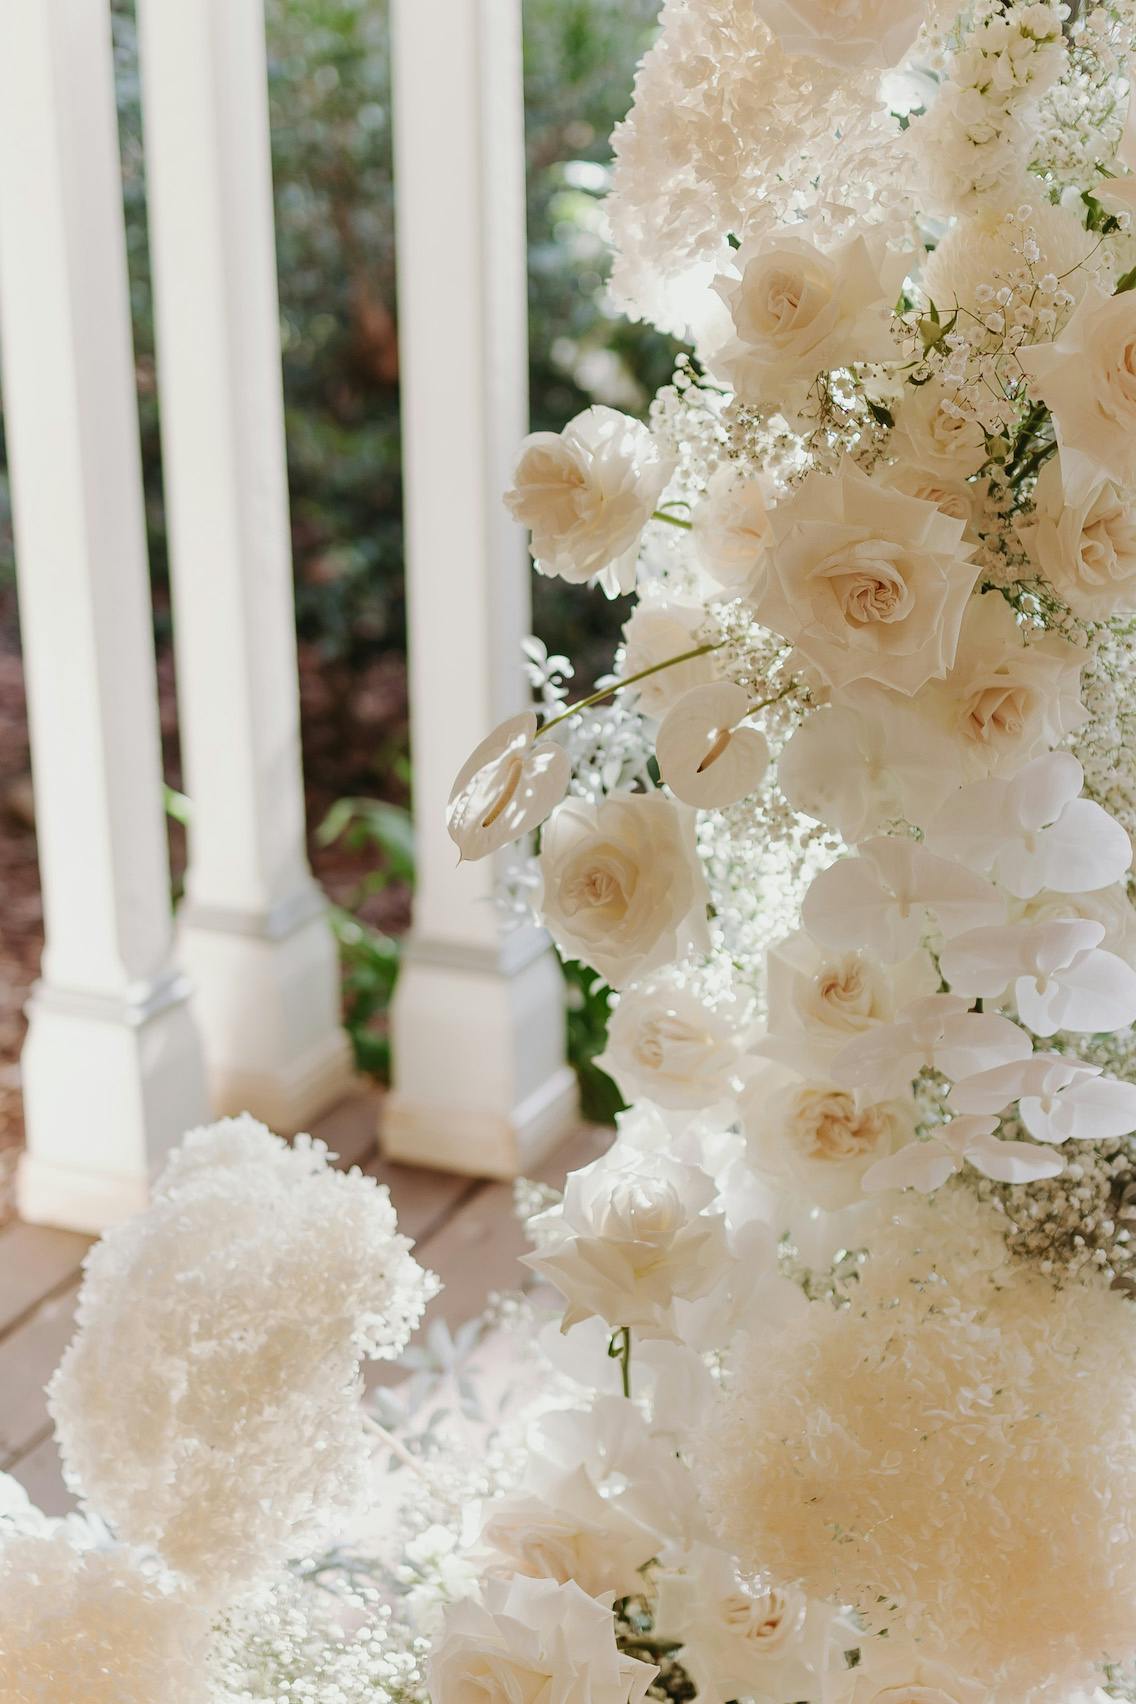 A close-up of a floral arrangement featuring a variety of white flowers, including roses and baby's breath. The arrangement is set against the backdrop of a white porch railing with greenery in the background. The overall appearance is elegant and serene.